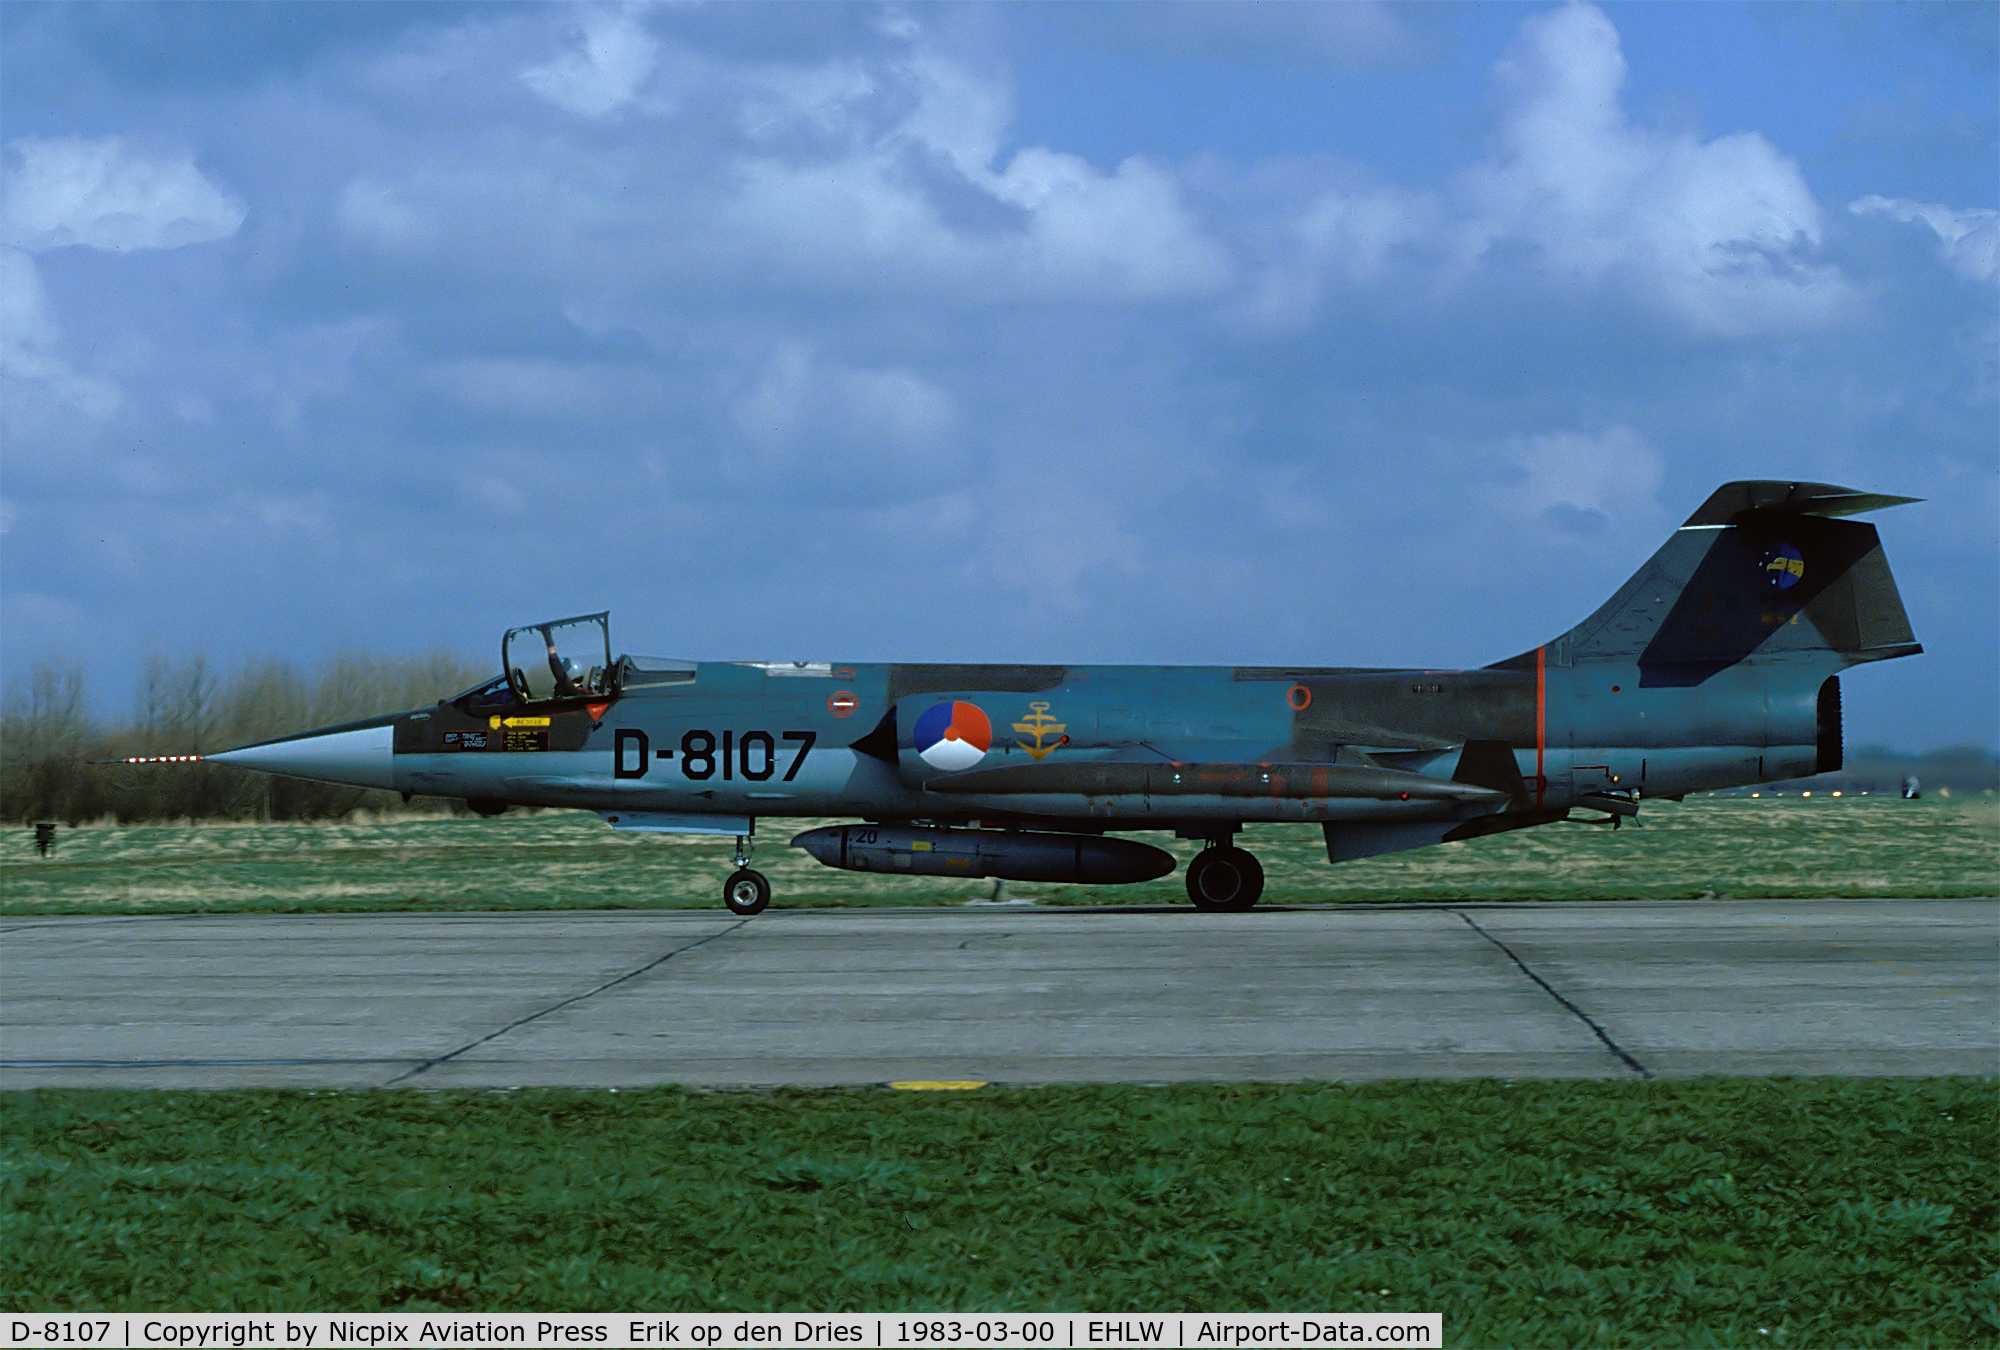 D-8107, Lockheed RF-104G Starfighter C/N 683-8107, 306 sqn F-104G D-8107 carries the reminders of a squadron exchange with German Navy MFG-2 on the jet-intake and the tail.